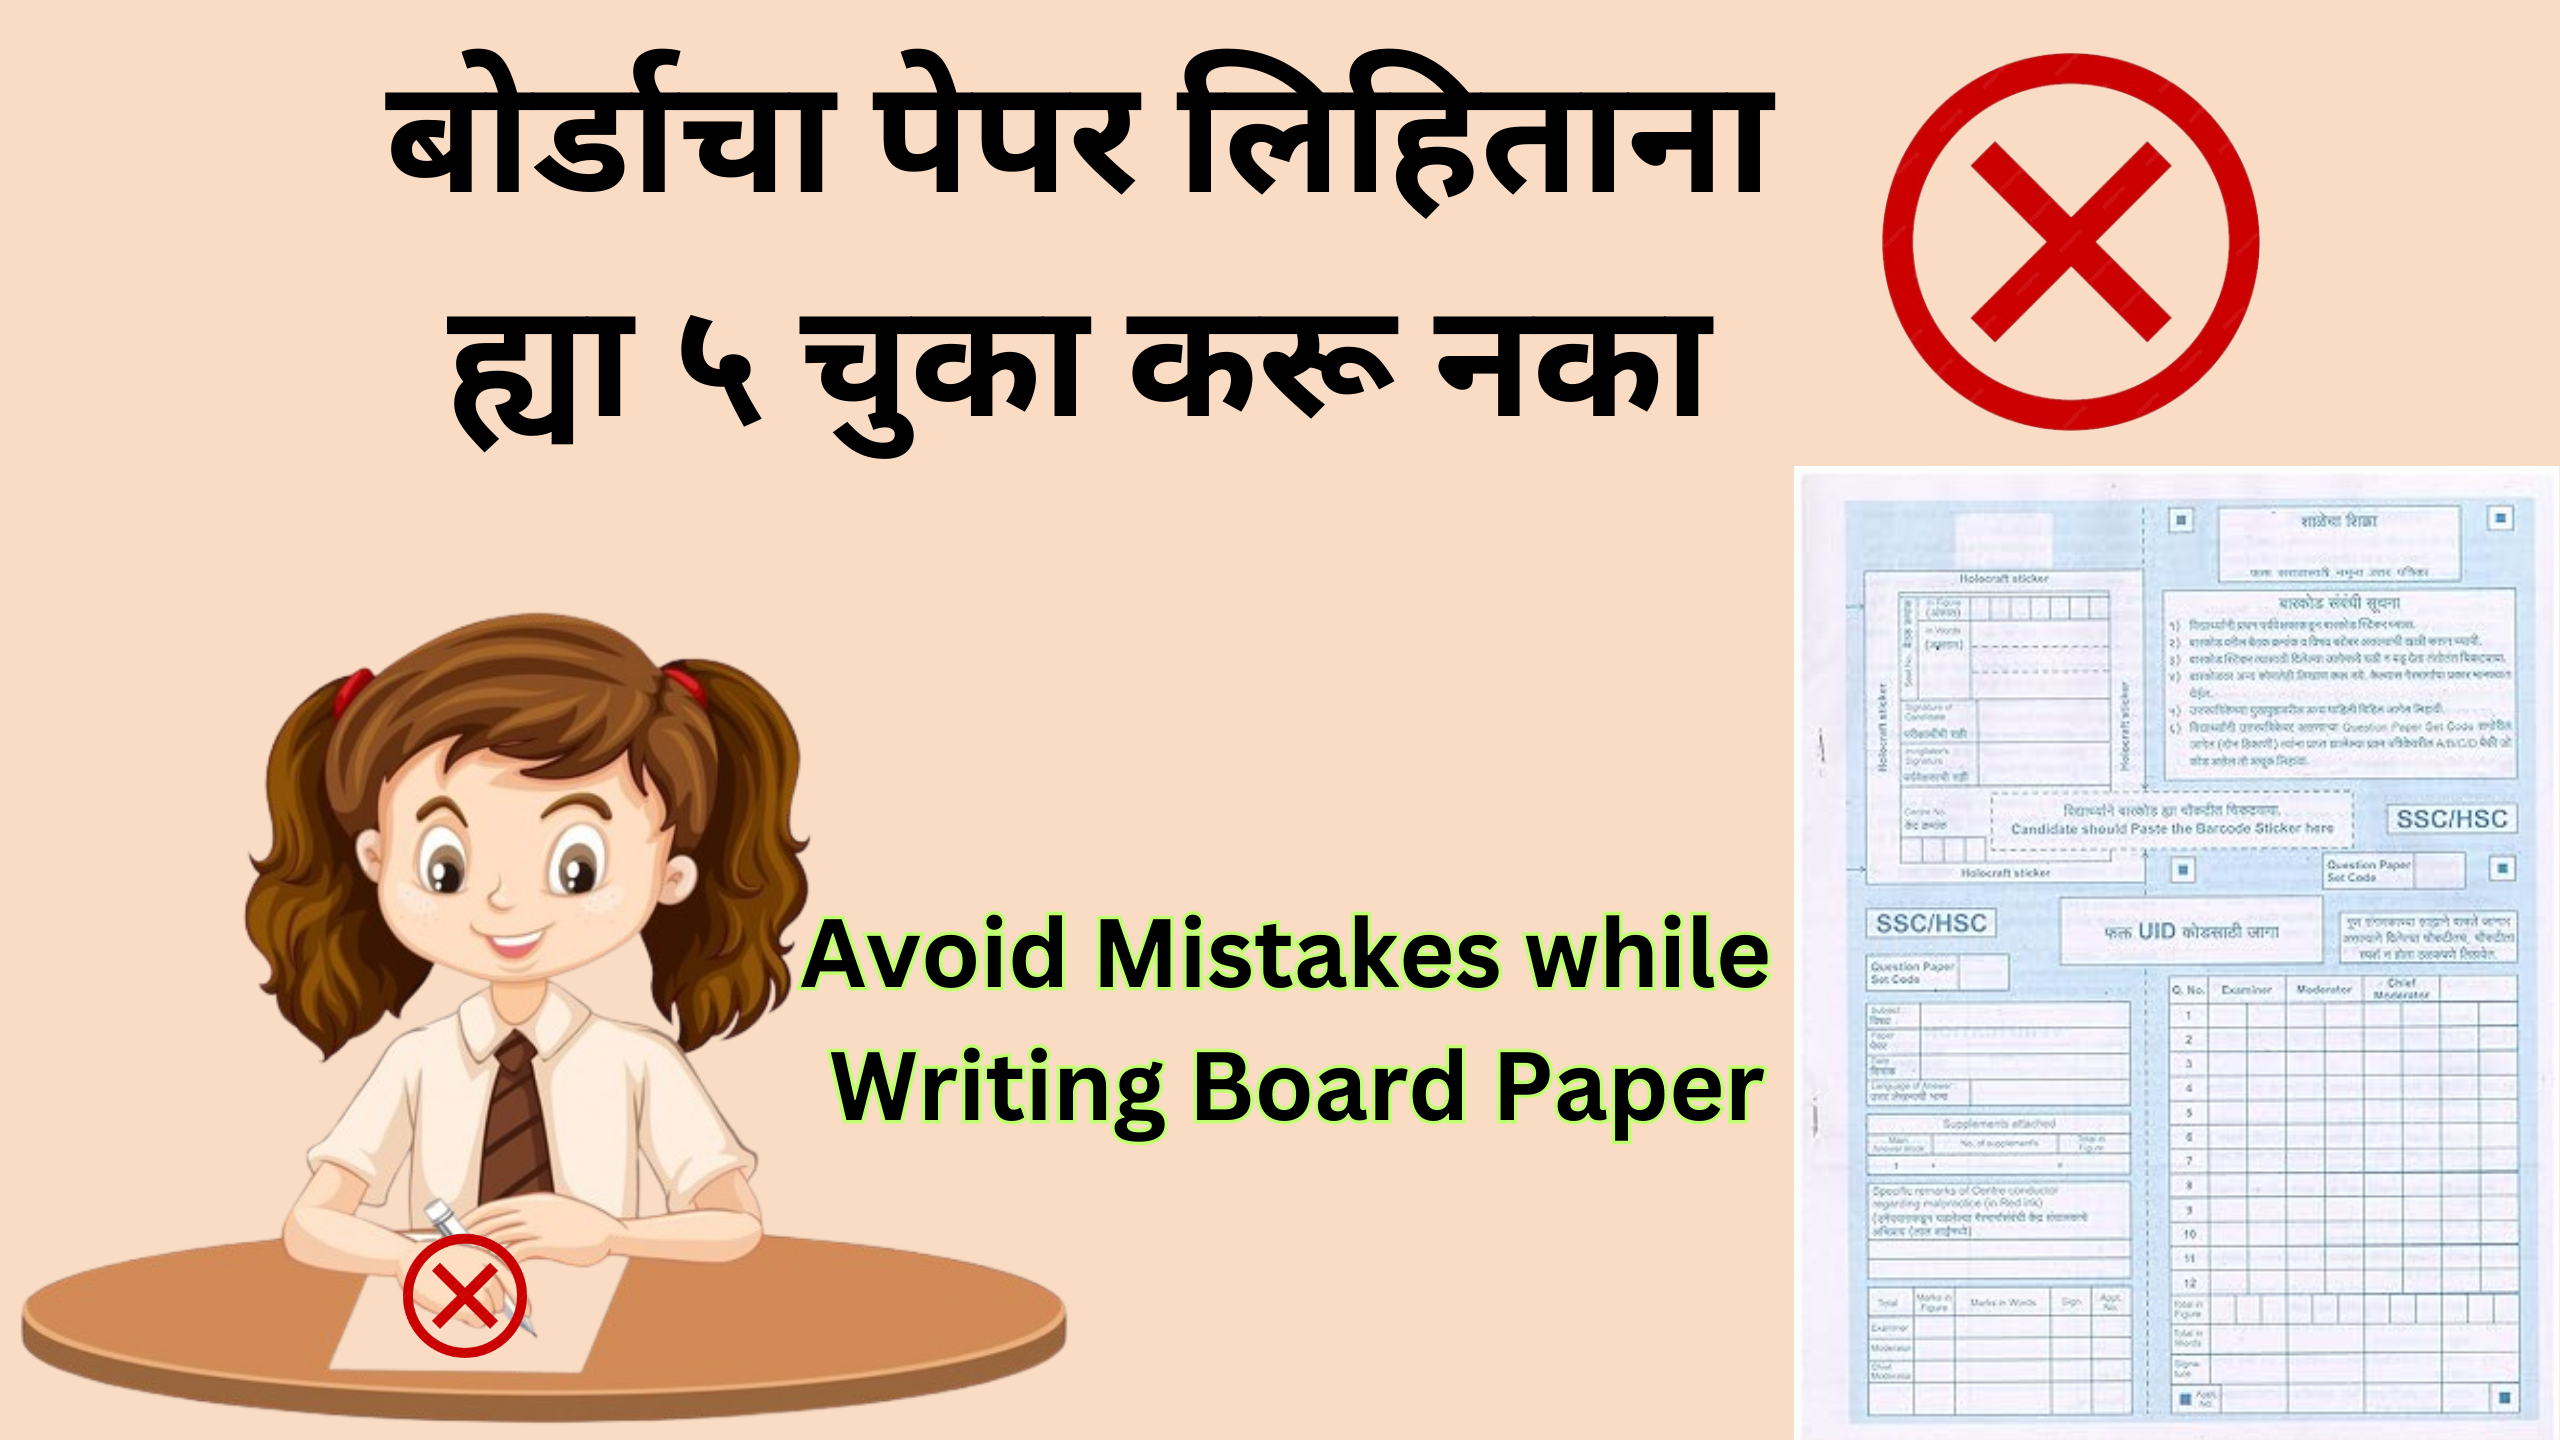 You are currently viewing बोर्डाचा पेपर लिहिताना ह्या ५ चुका करू नका | Mistakes to Avoid while Writing Board Exam.